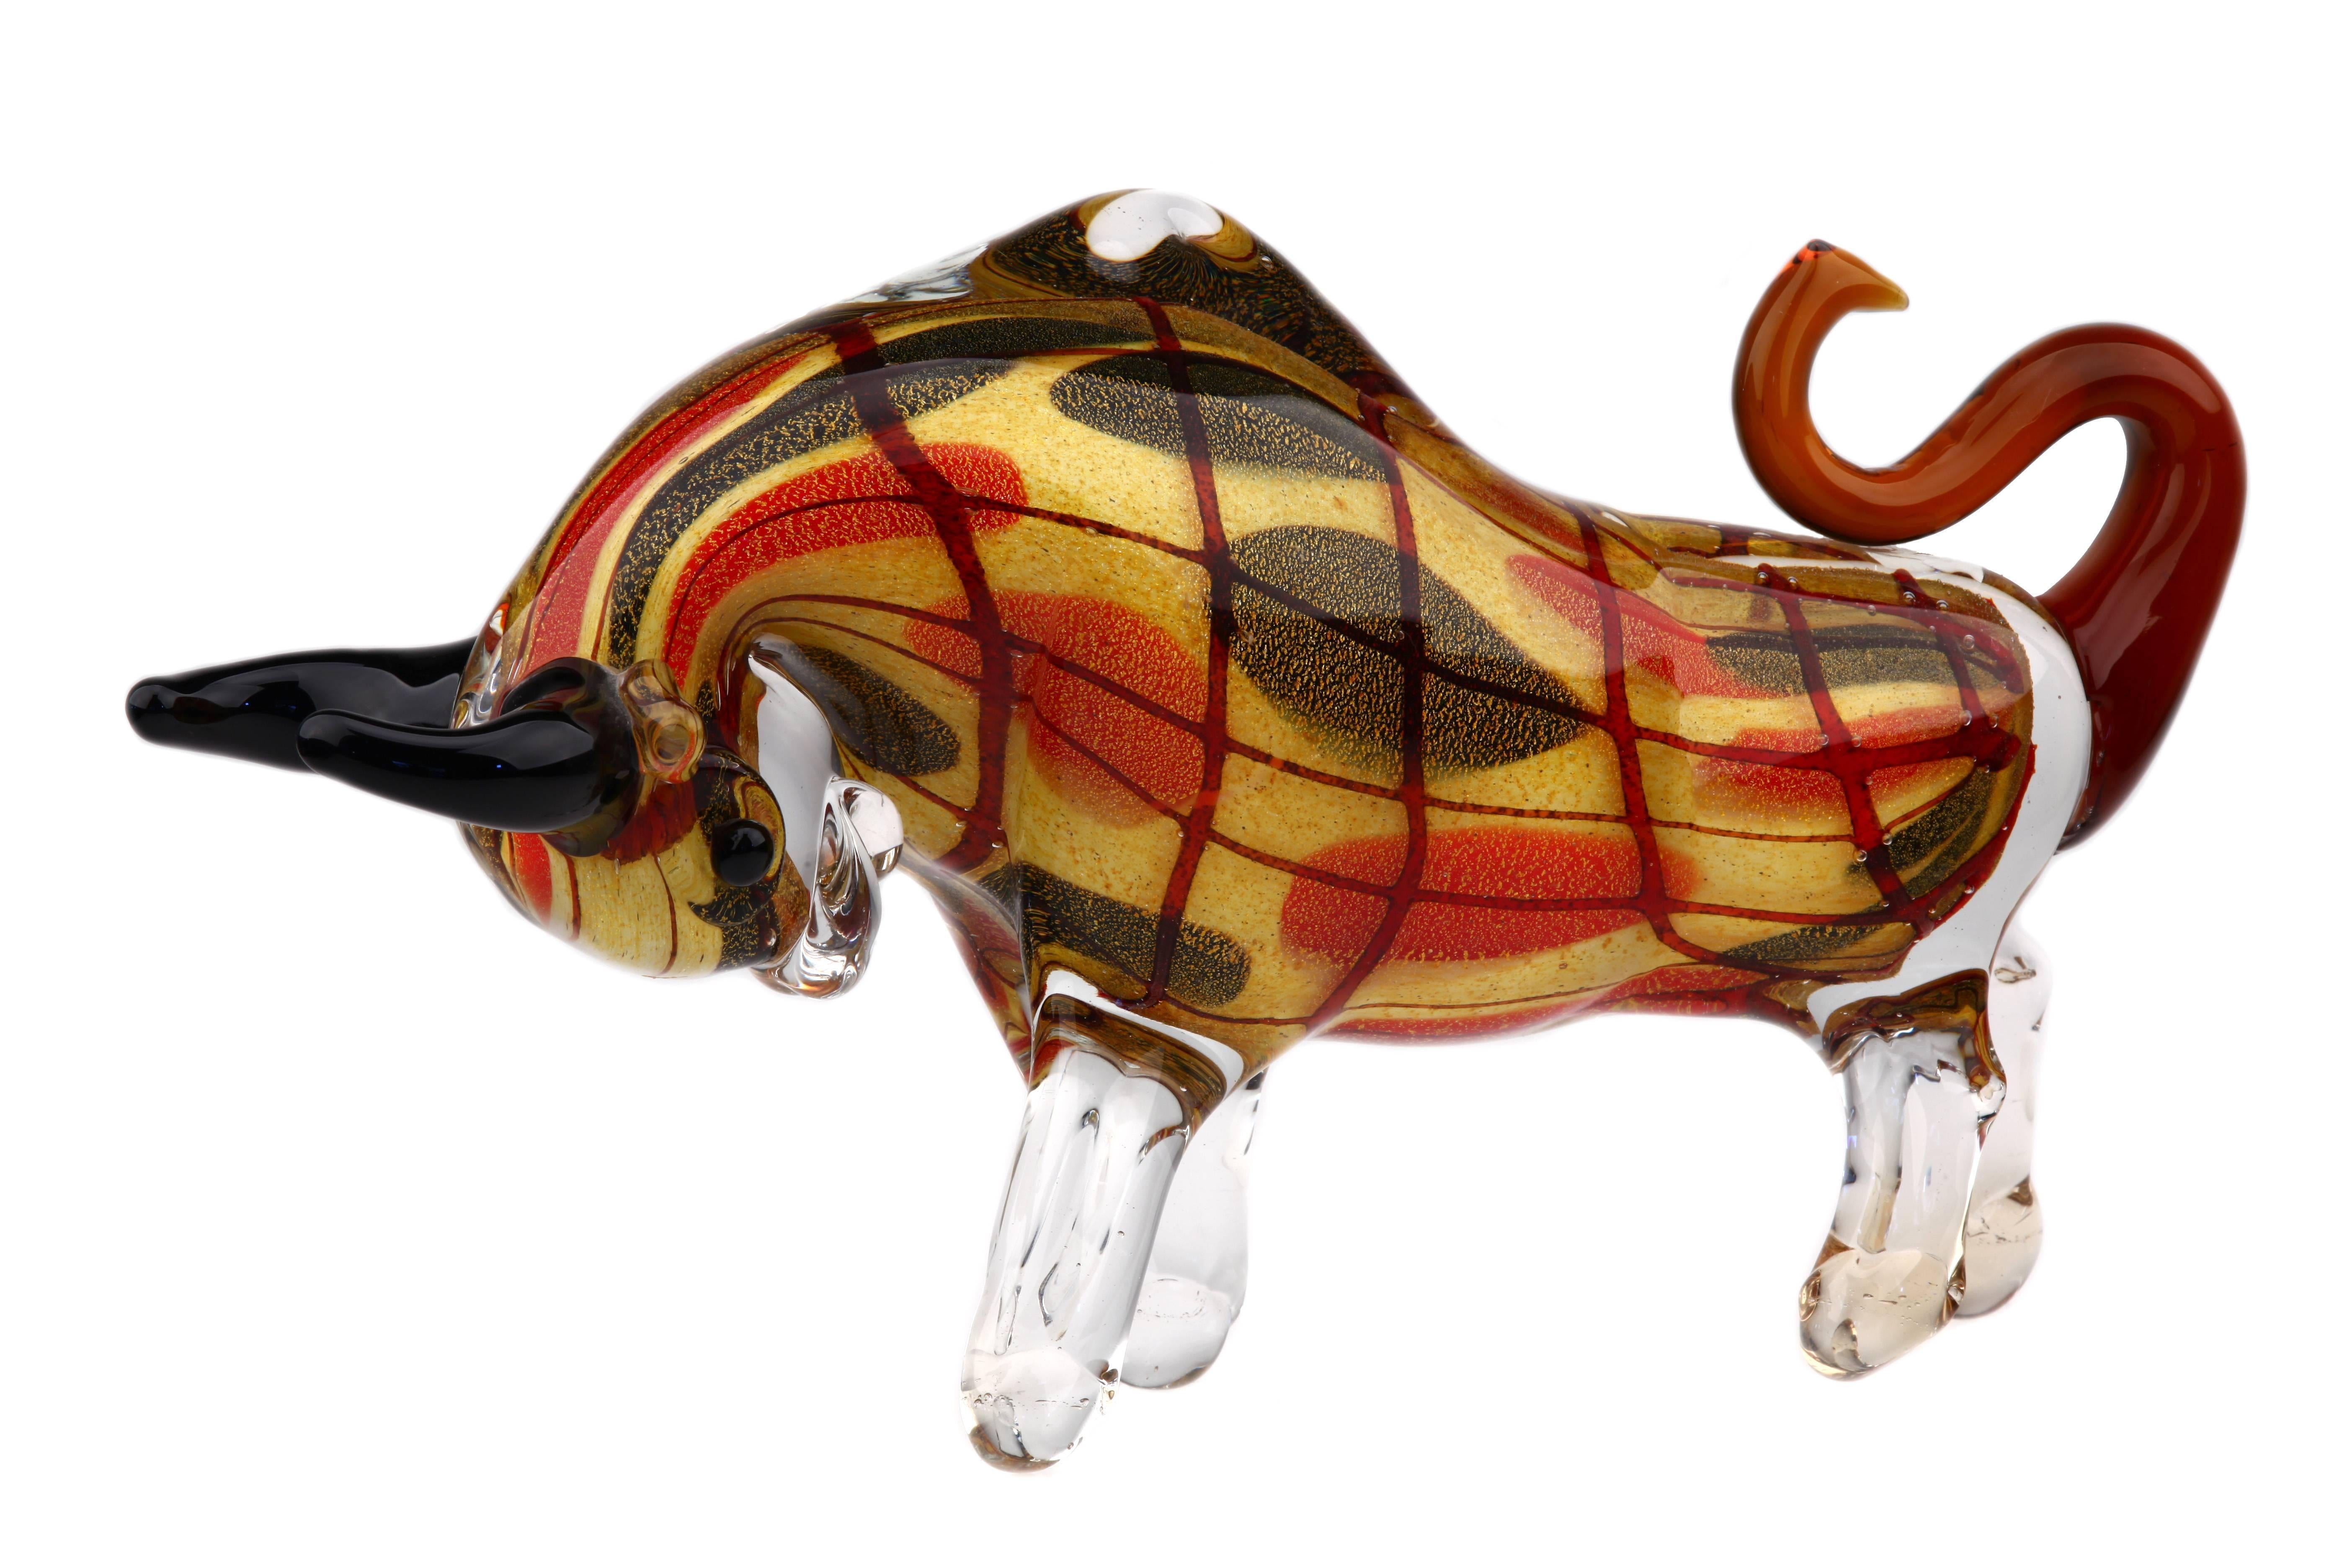 Murano multicolored glass large bull sculpture. Vintage retro Mid-Century Modern.
Is in a very good condition.

Measures: Height 22 cm / 8.7 inch,
width 40 cm / 15.7 inch,
depth 12 cm / 4.7 inch.